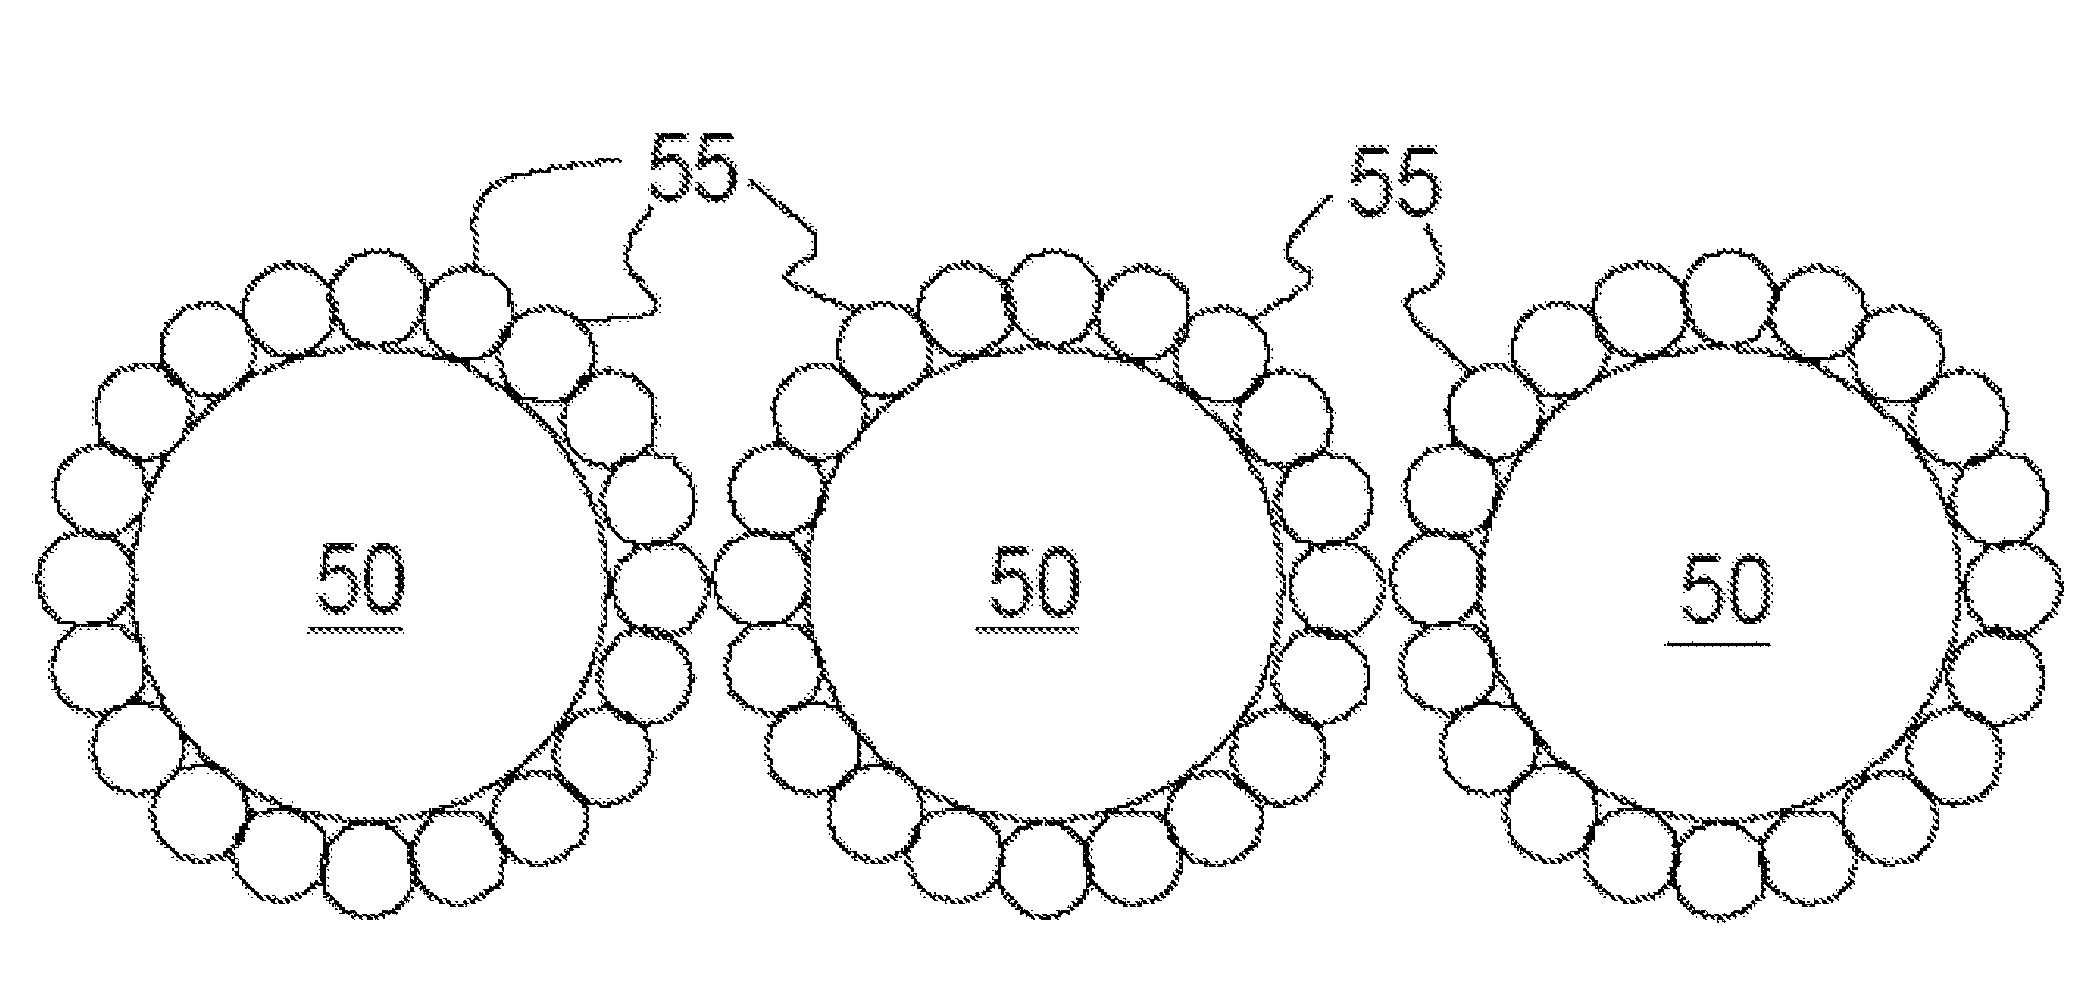 Method of producing uniform blends of nano and micron powders